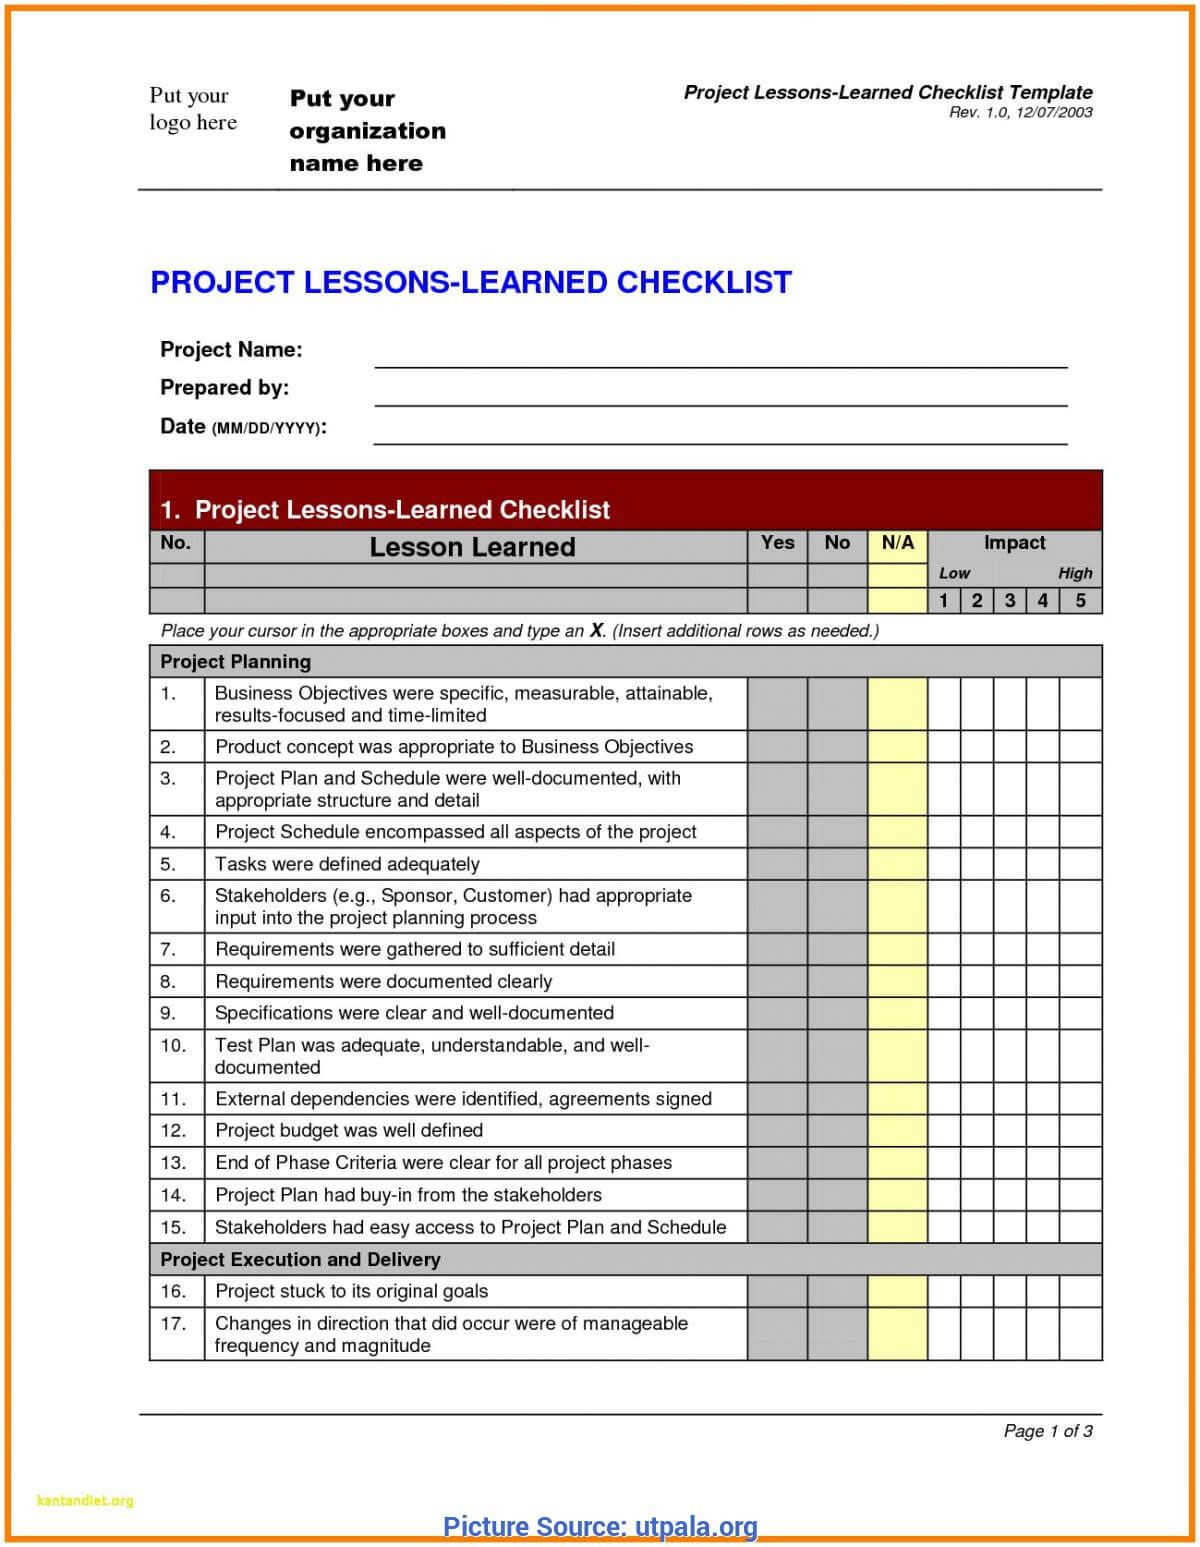 Fresh Lessons Learned Report Template Prince2 Prince2 Inside Prince2 Lessons Learned Report Template